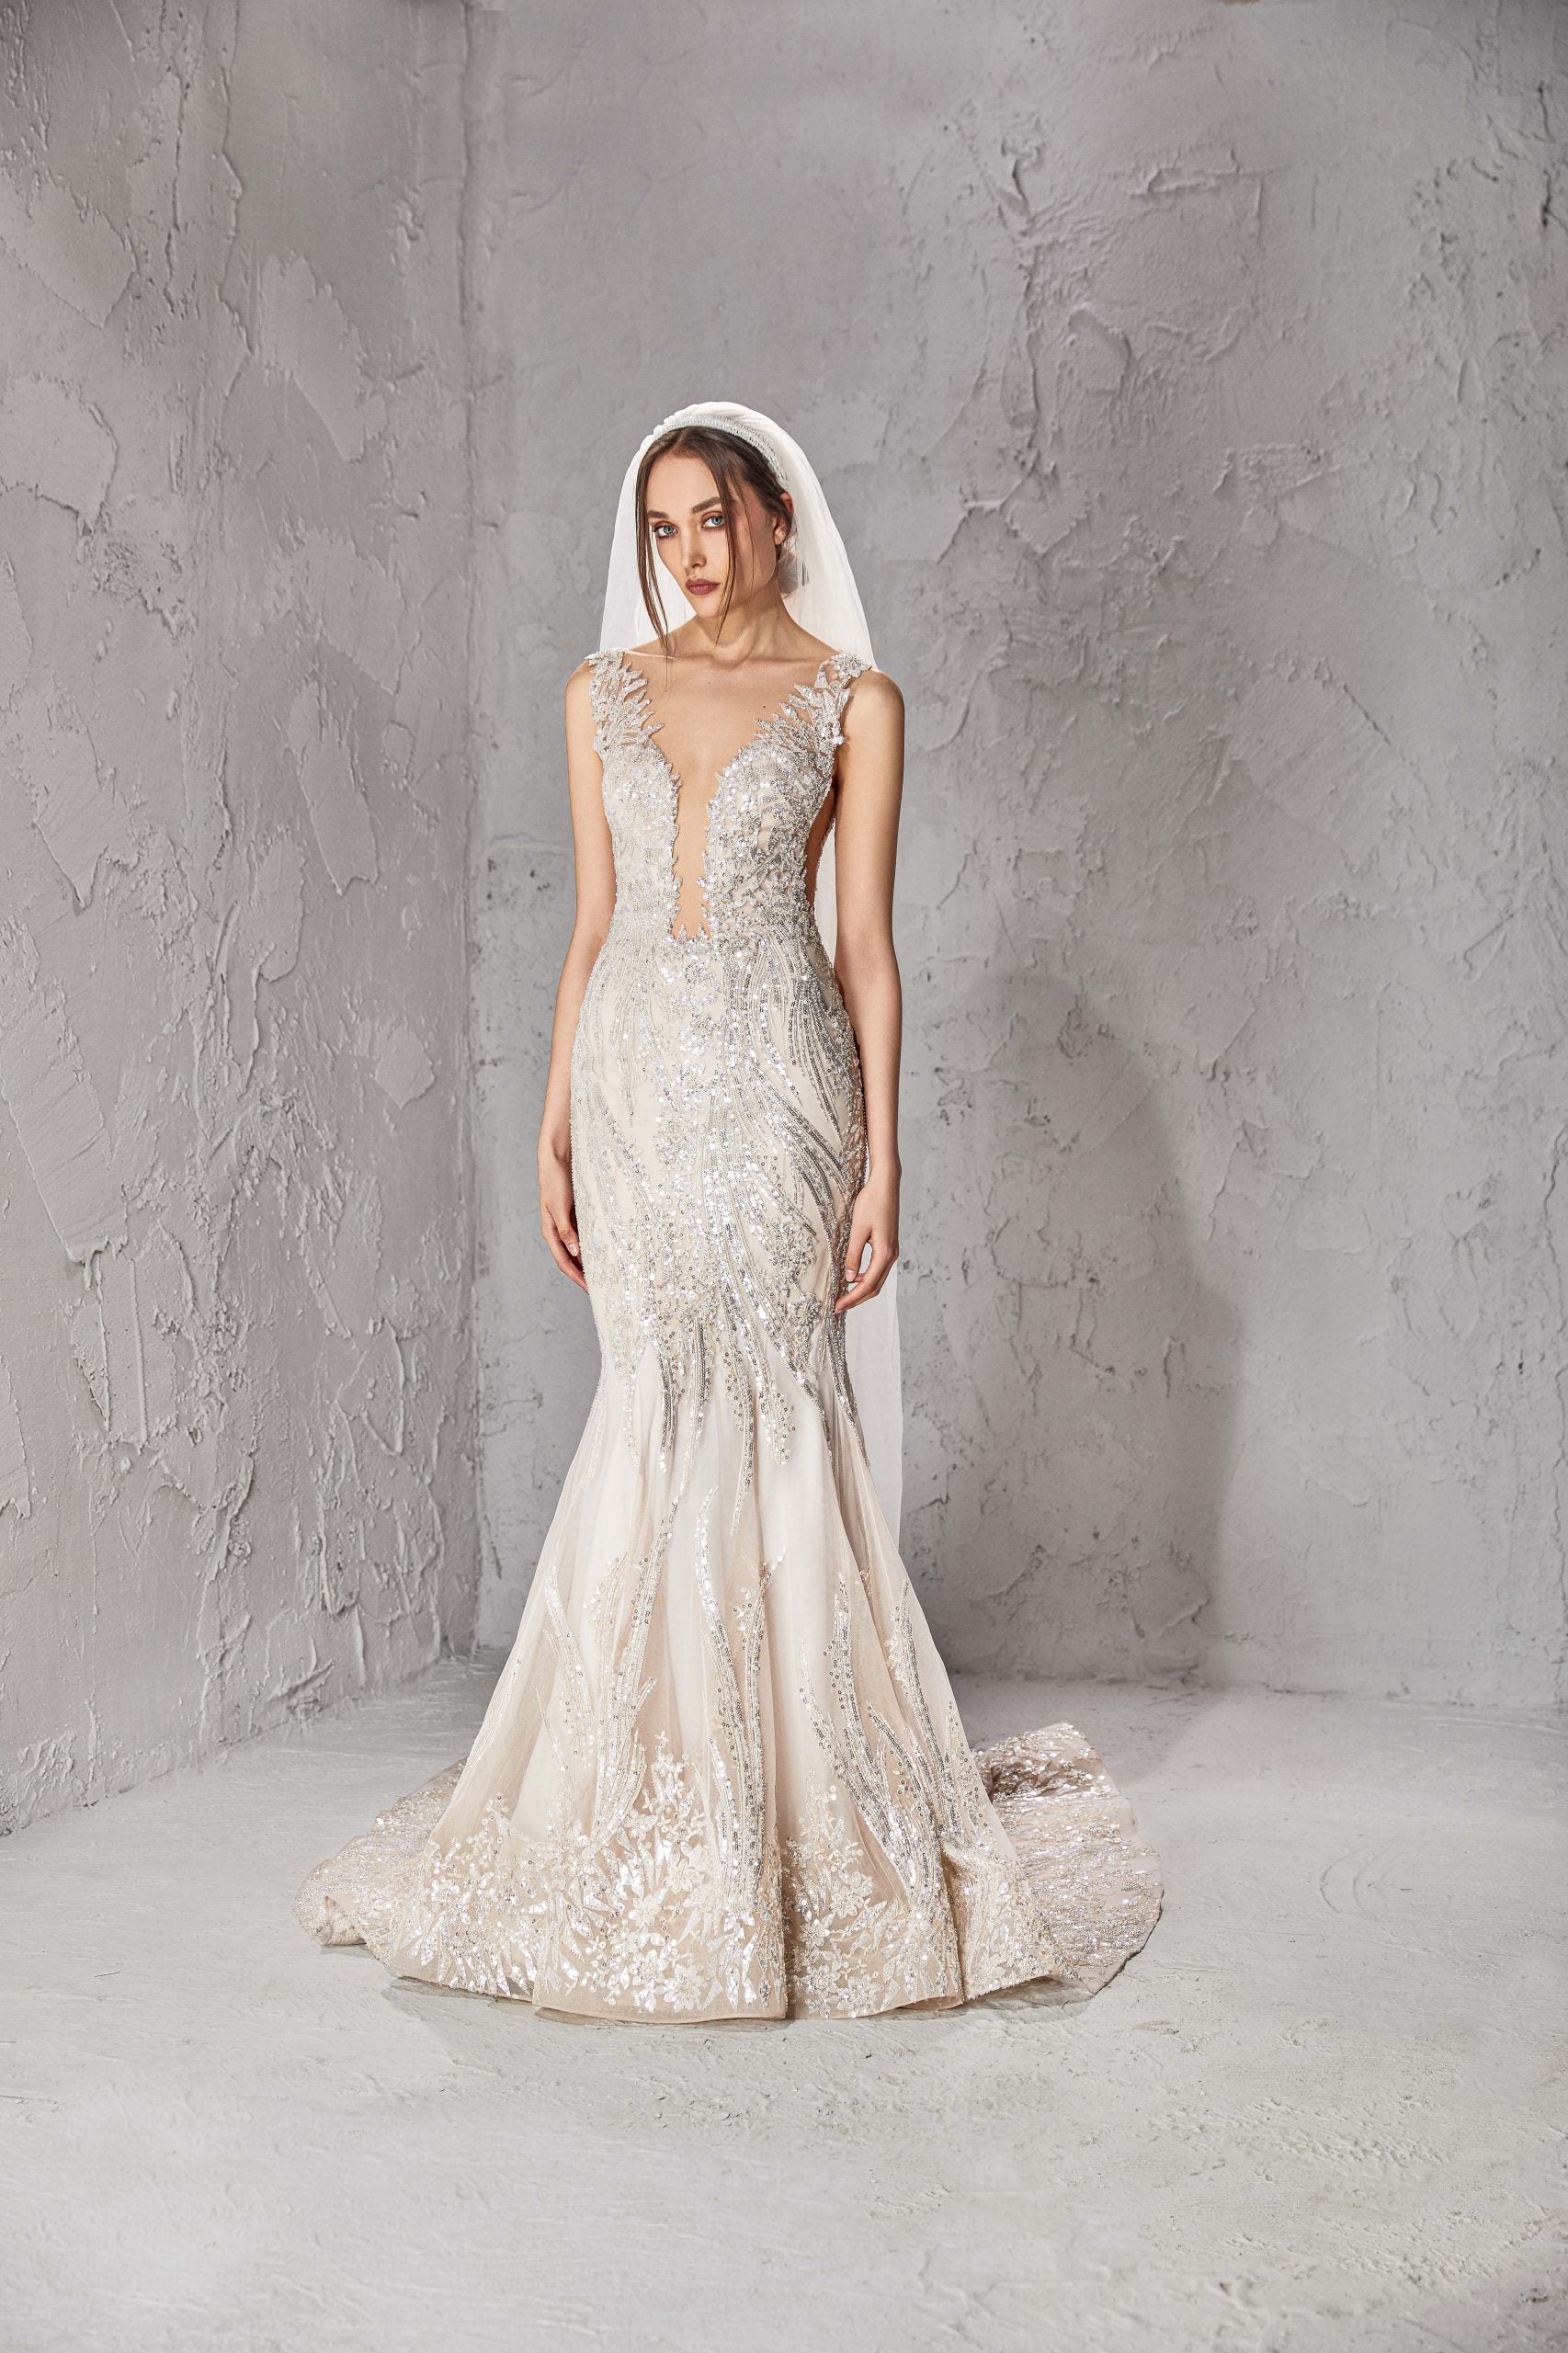 Sleeveless Mermaid Wedding Dress With Plunging V Neckline And Open Back